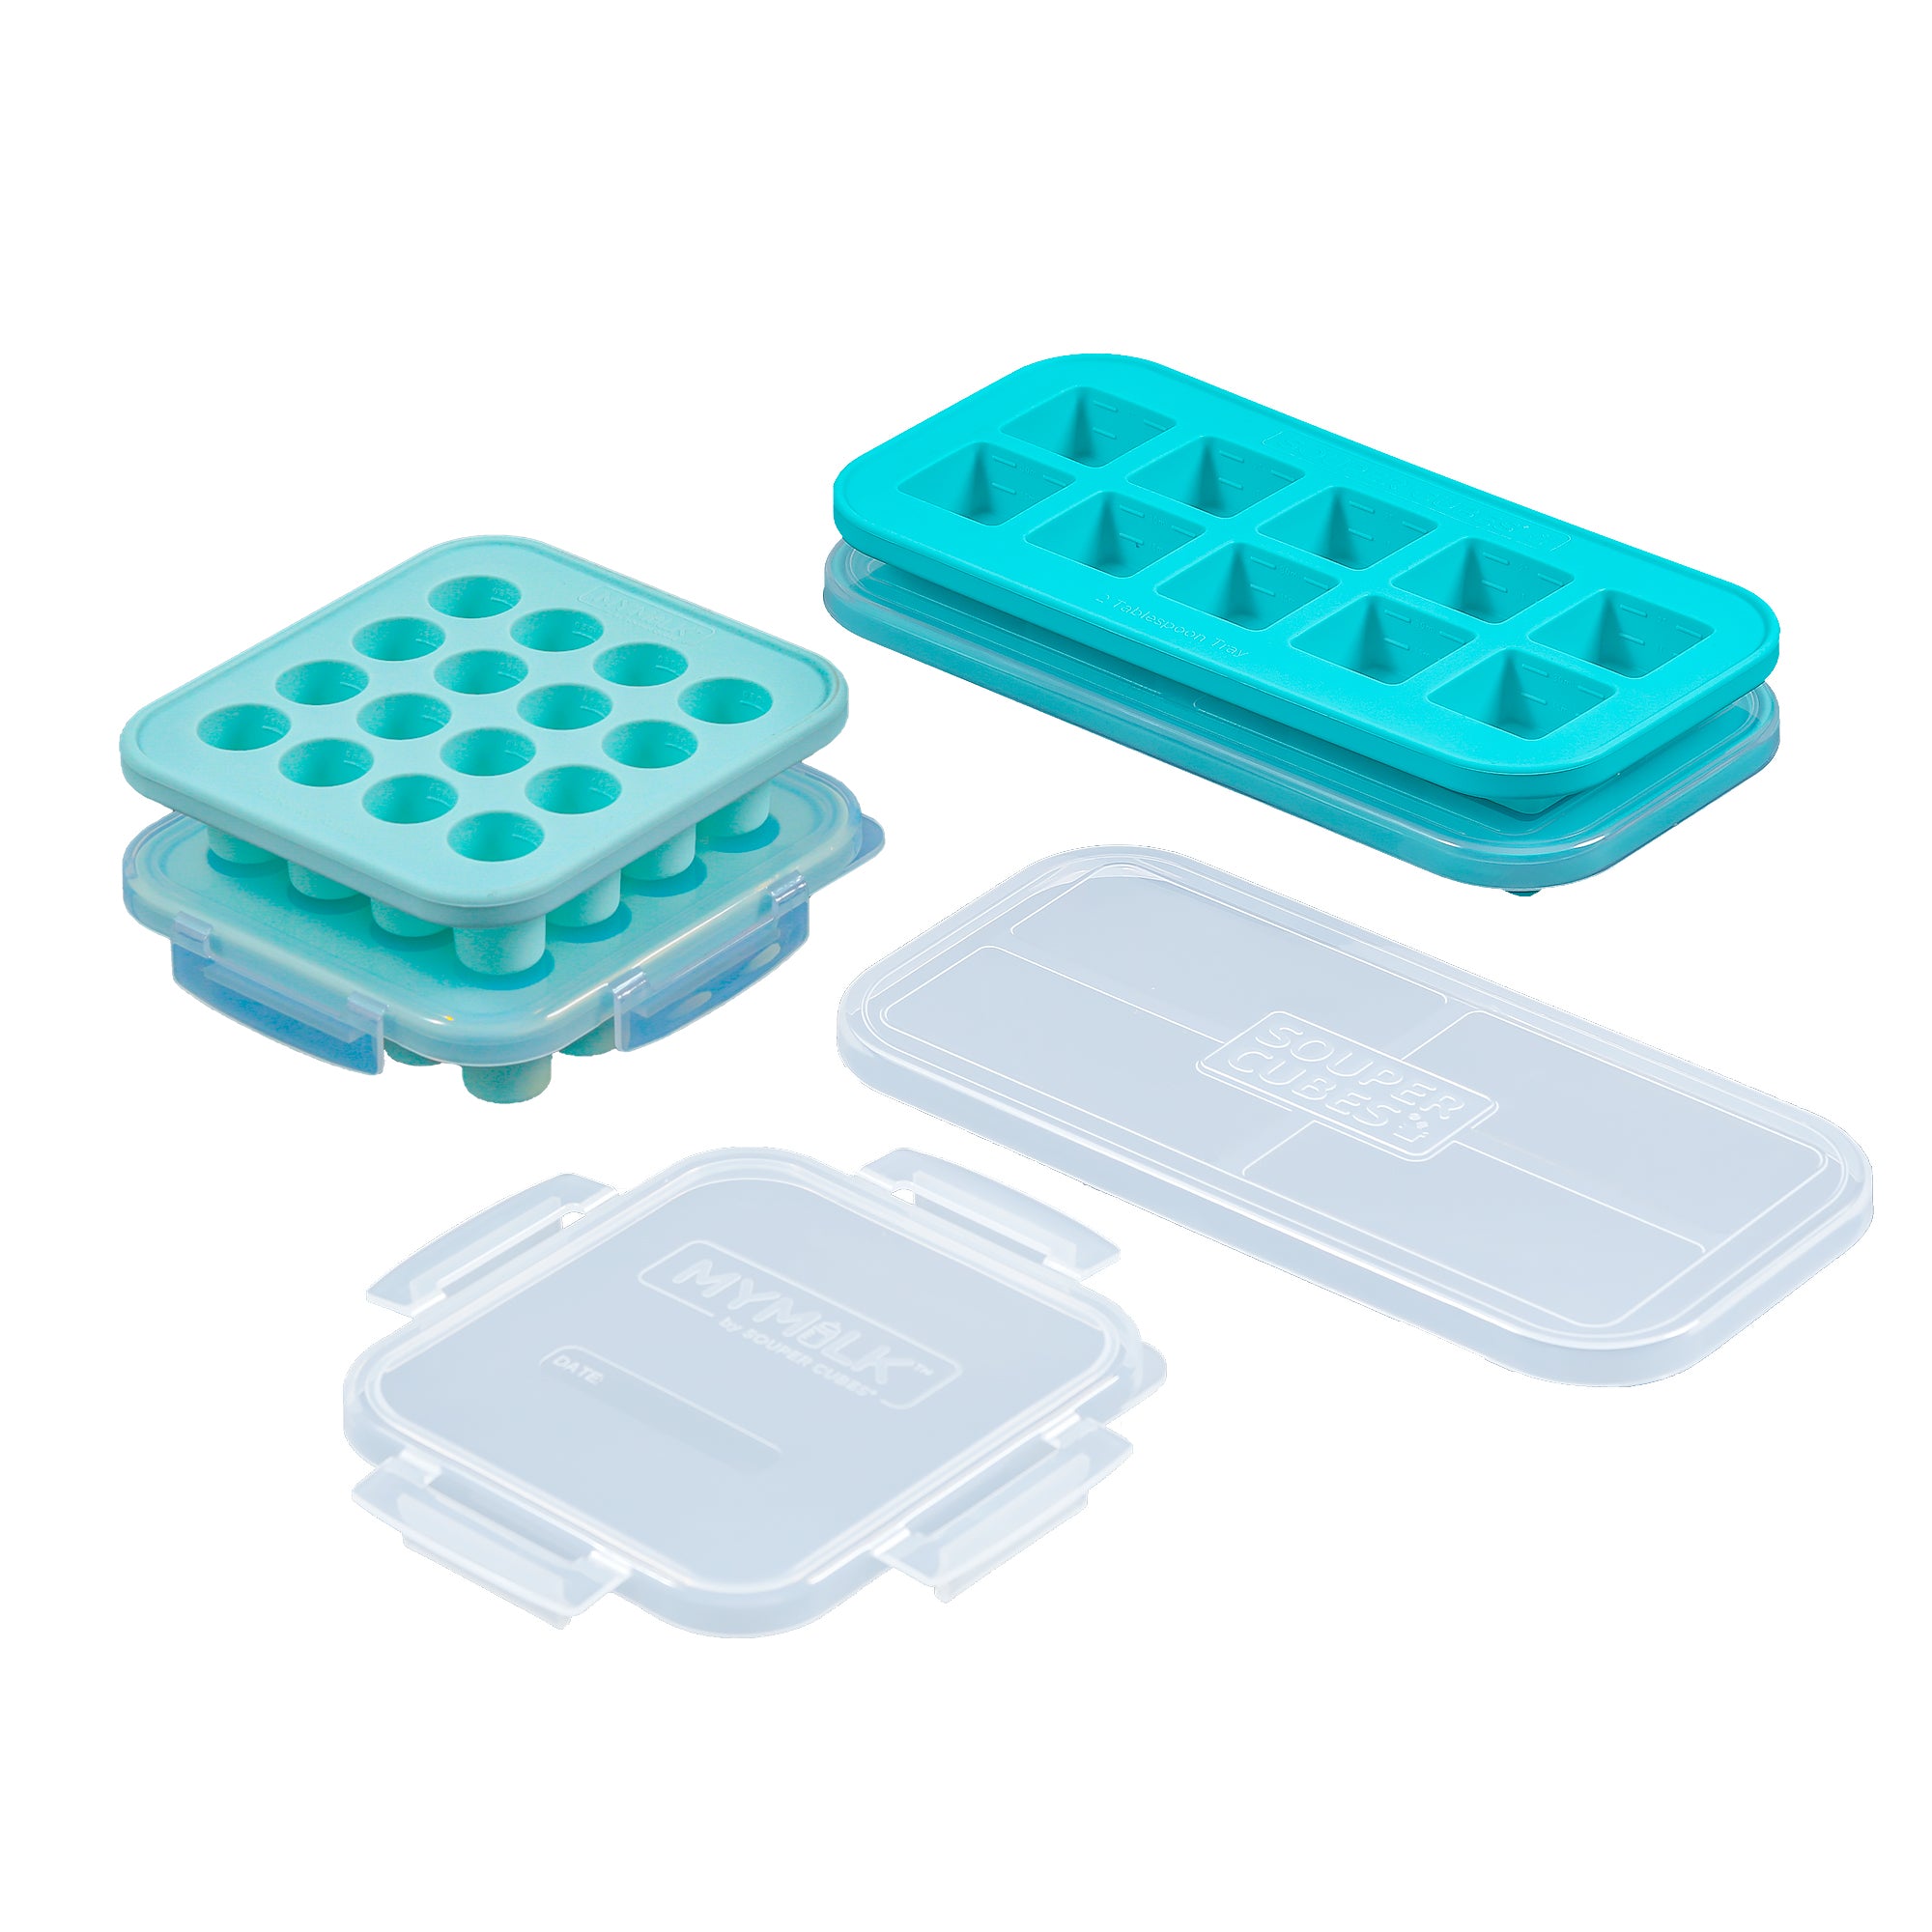  Souper Cubes 2 Tbsp Silicone Freezer Tray With Lid